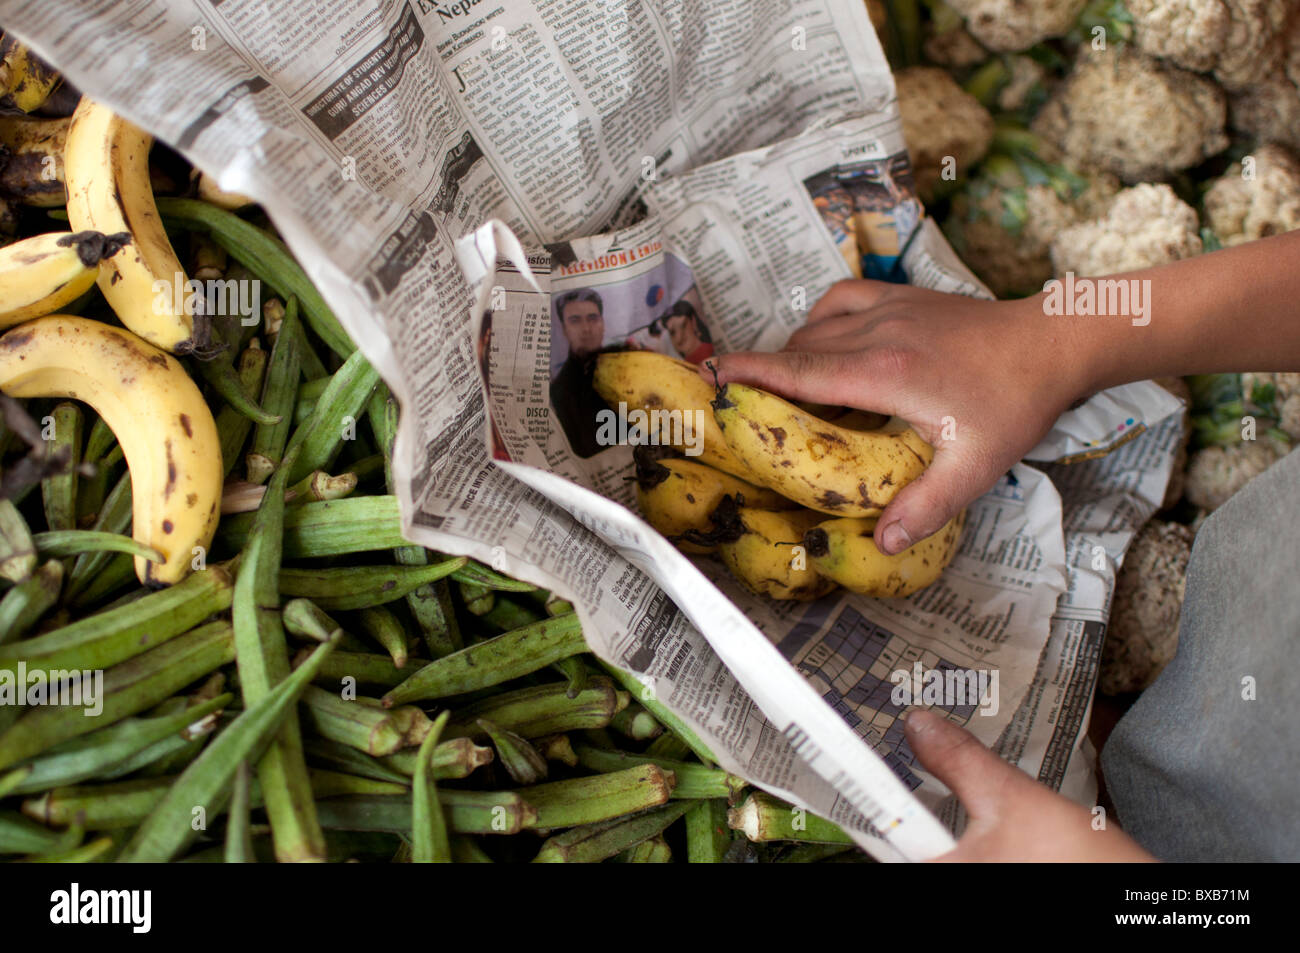 A young boy packs Bananas into newspaper, India. Stock Photo